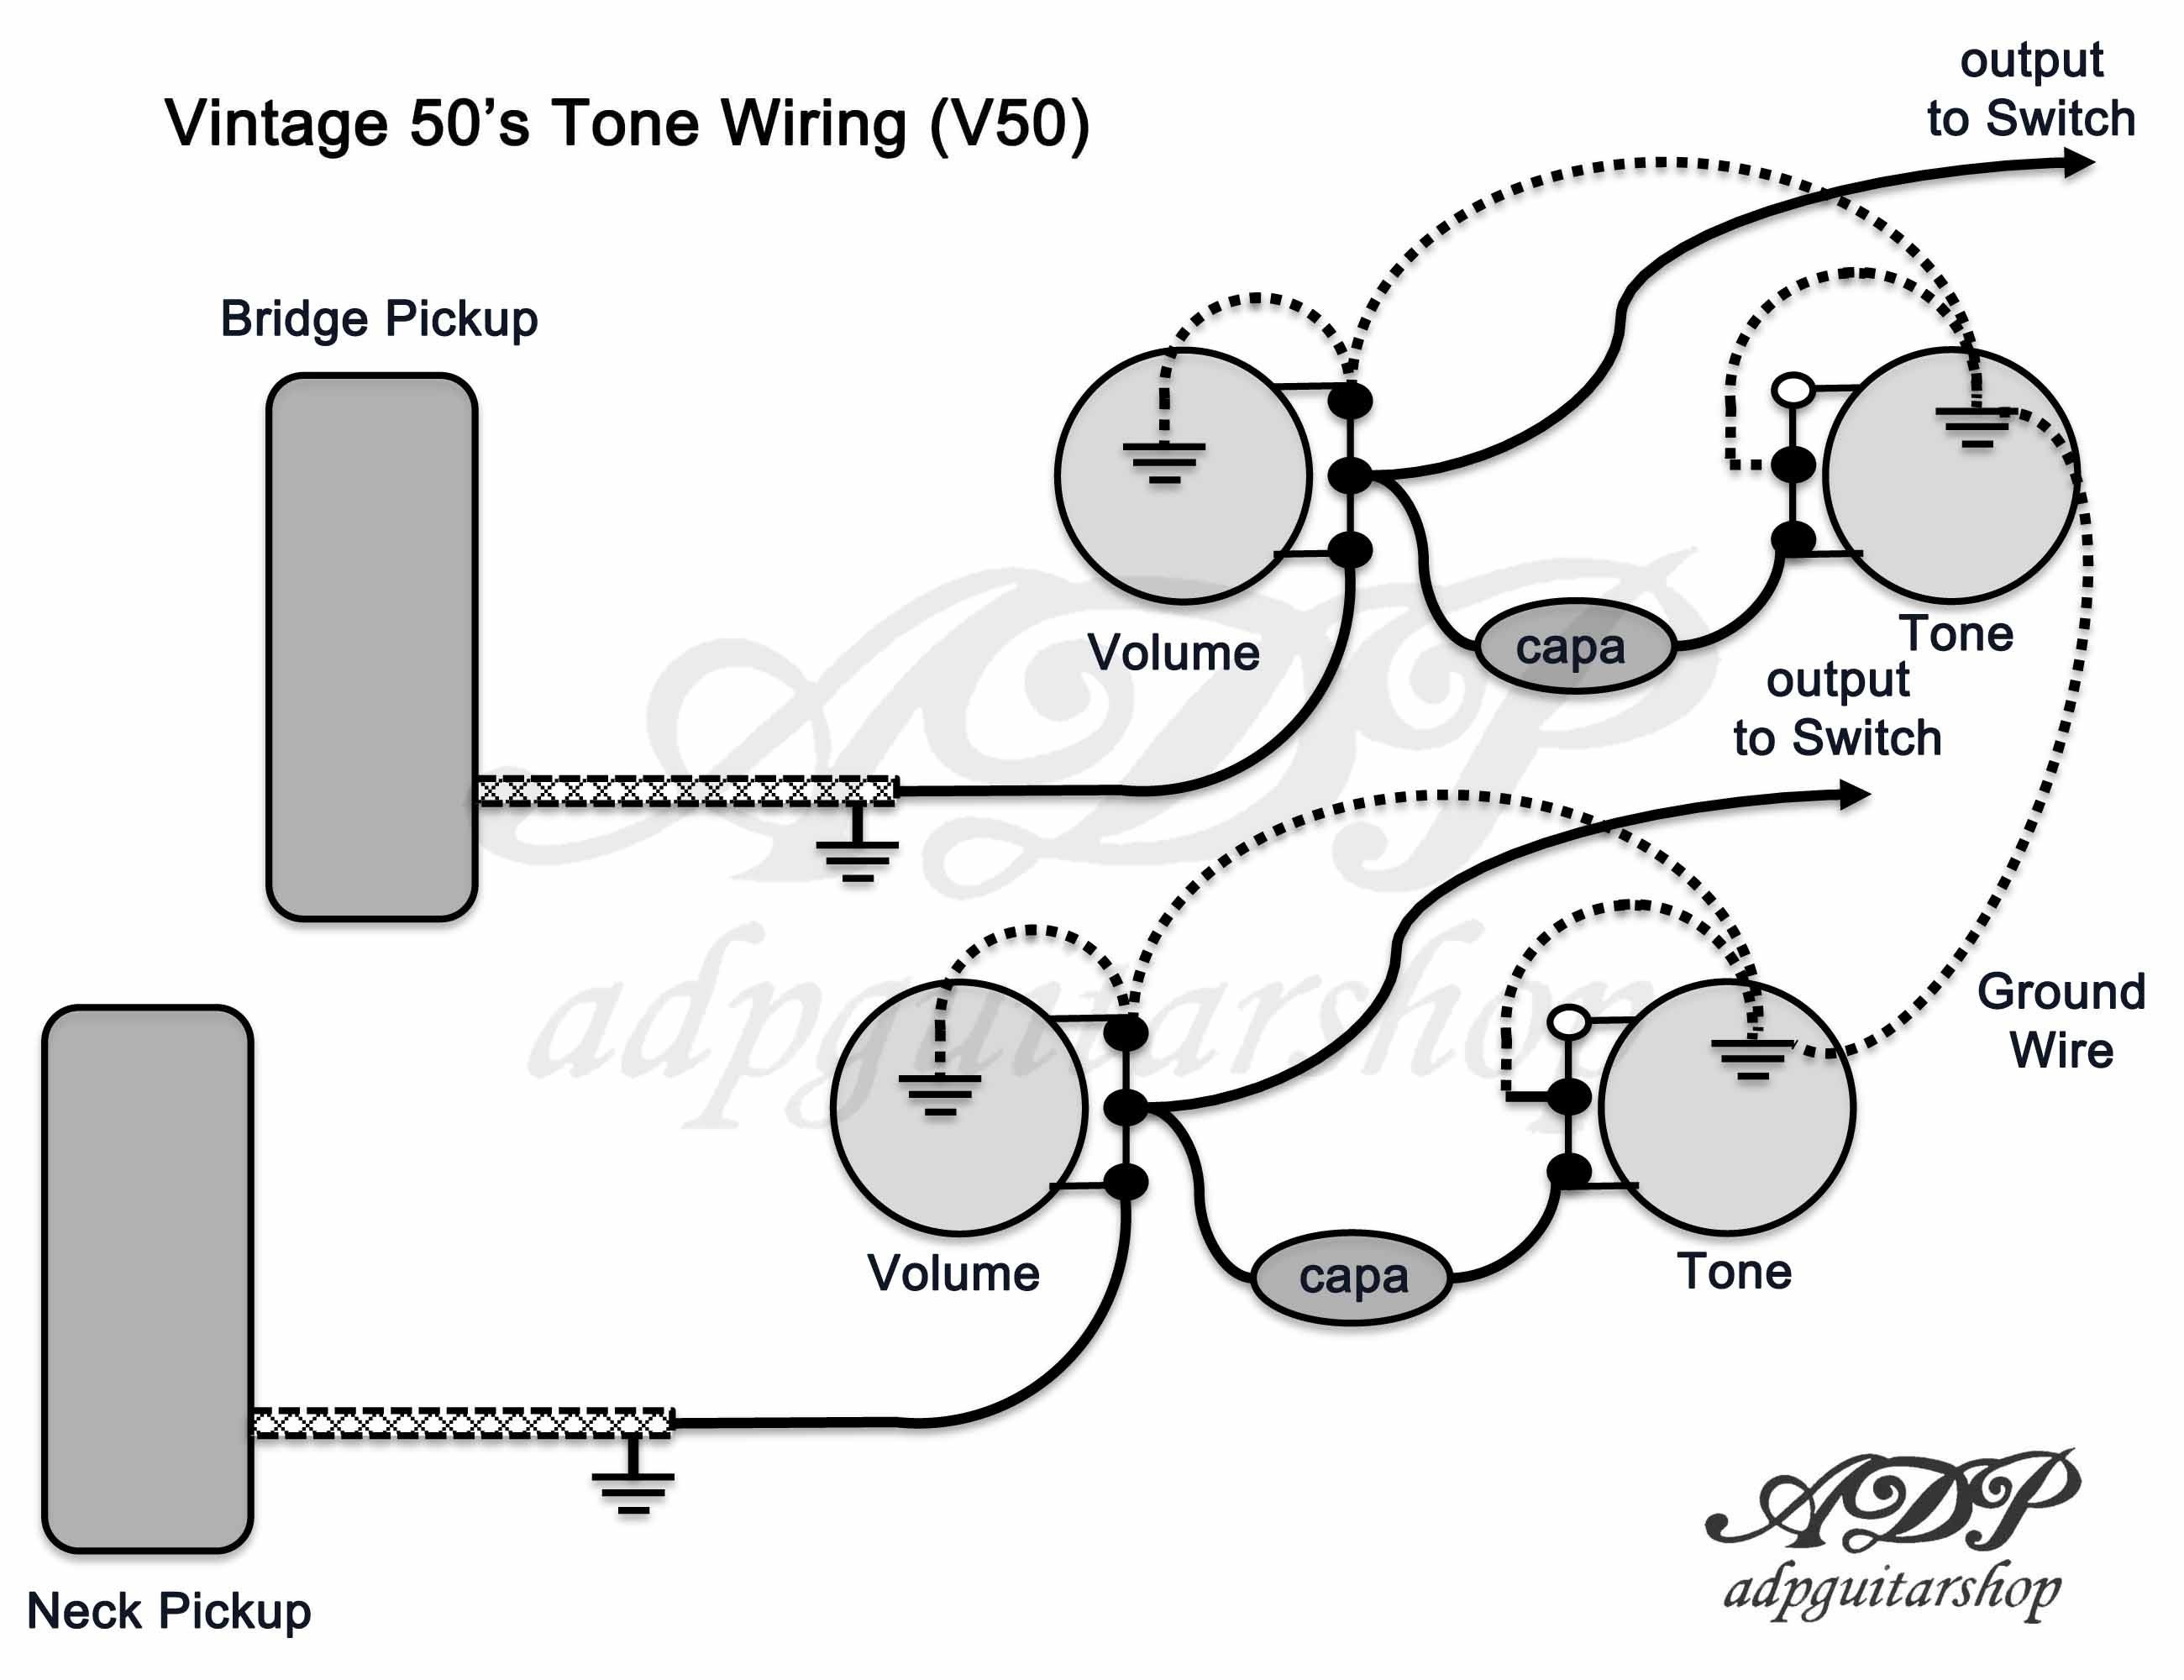 Wiring Diagrams for Gibson Guitars Save Gibson Les Paul Special Wiring Diagram Valid Les Paul Special